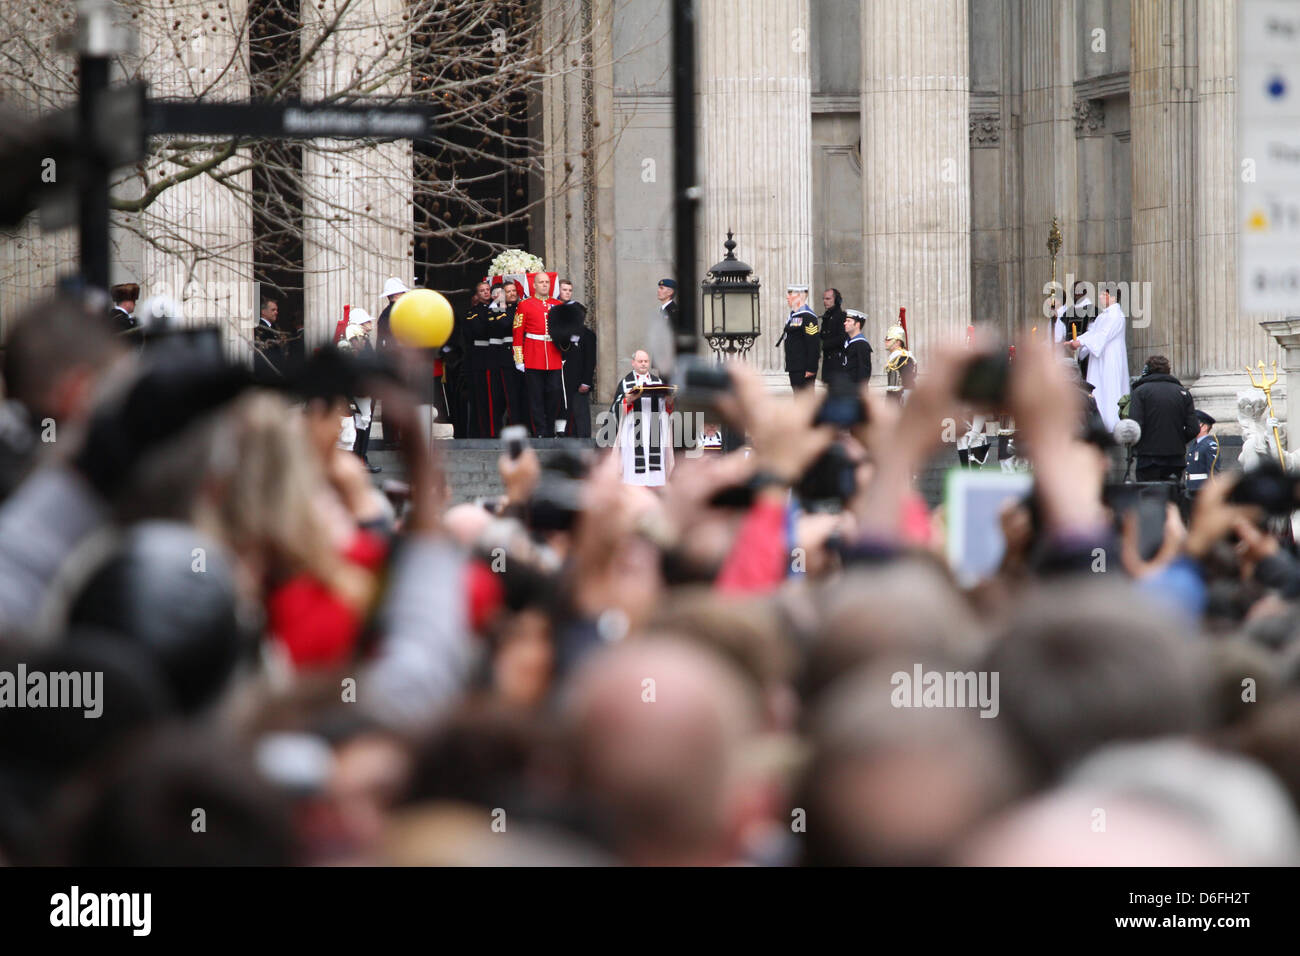 London, UK. 17th April 2013. The Funeral of Baroness Margaret Thatcher. The coffin of Baroness Margaret Thatcher leaves St. Paul's Cathedral as the crowds look on. The Funeral service takes place in St. Paul's Cathedral, London. Pic: Paul Marriott Photography/Alamy Live News Stock Photo